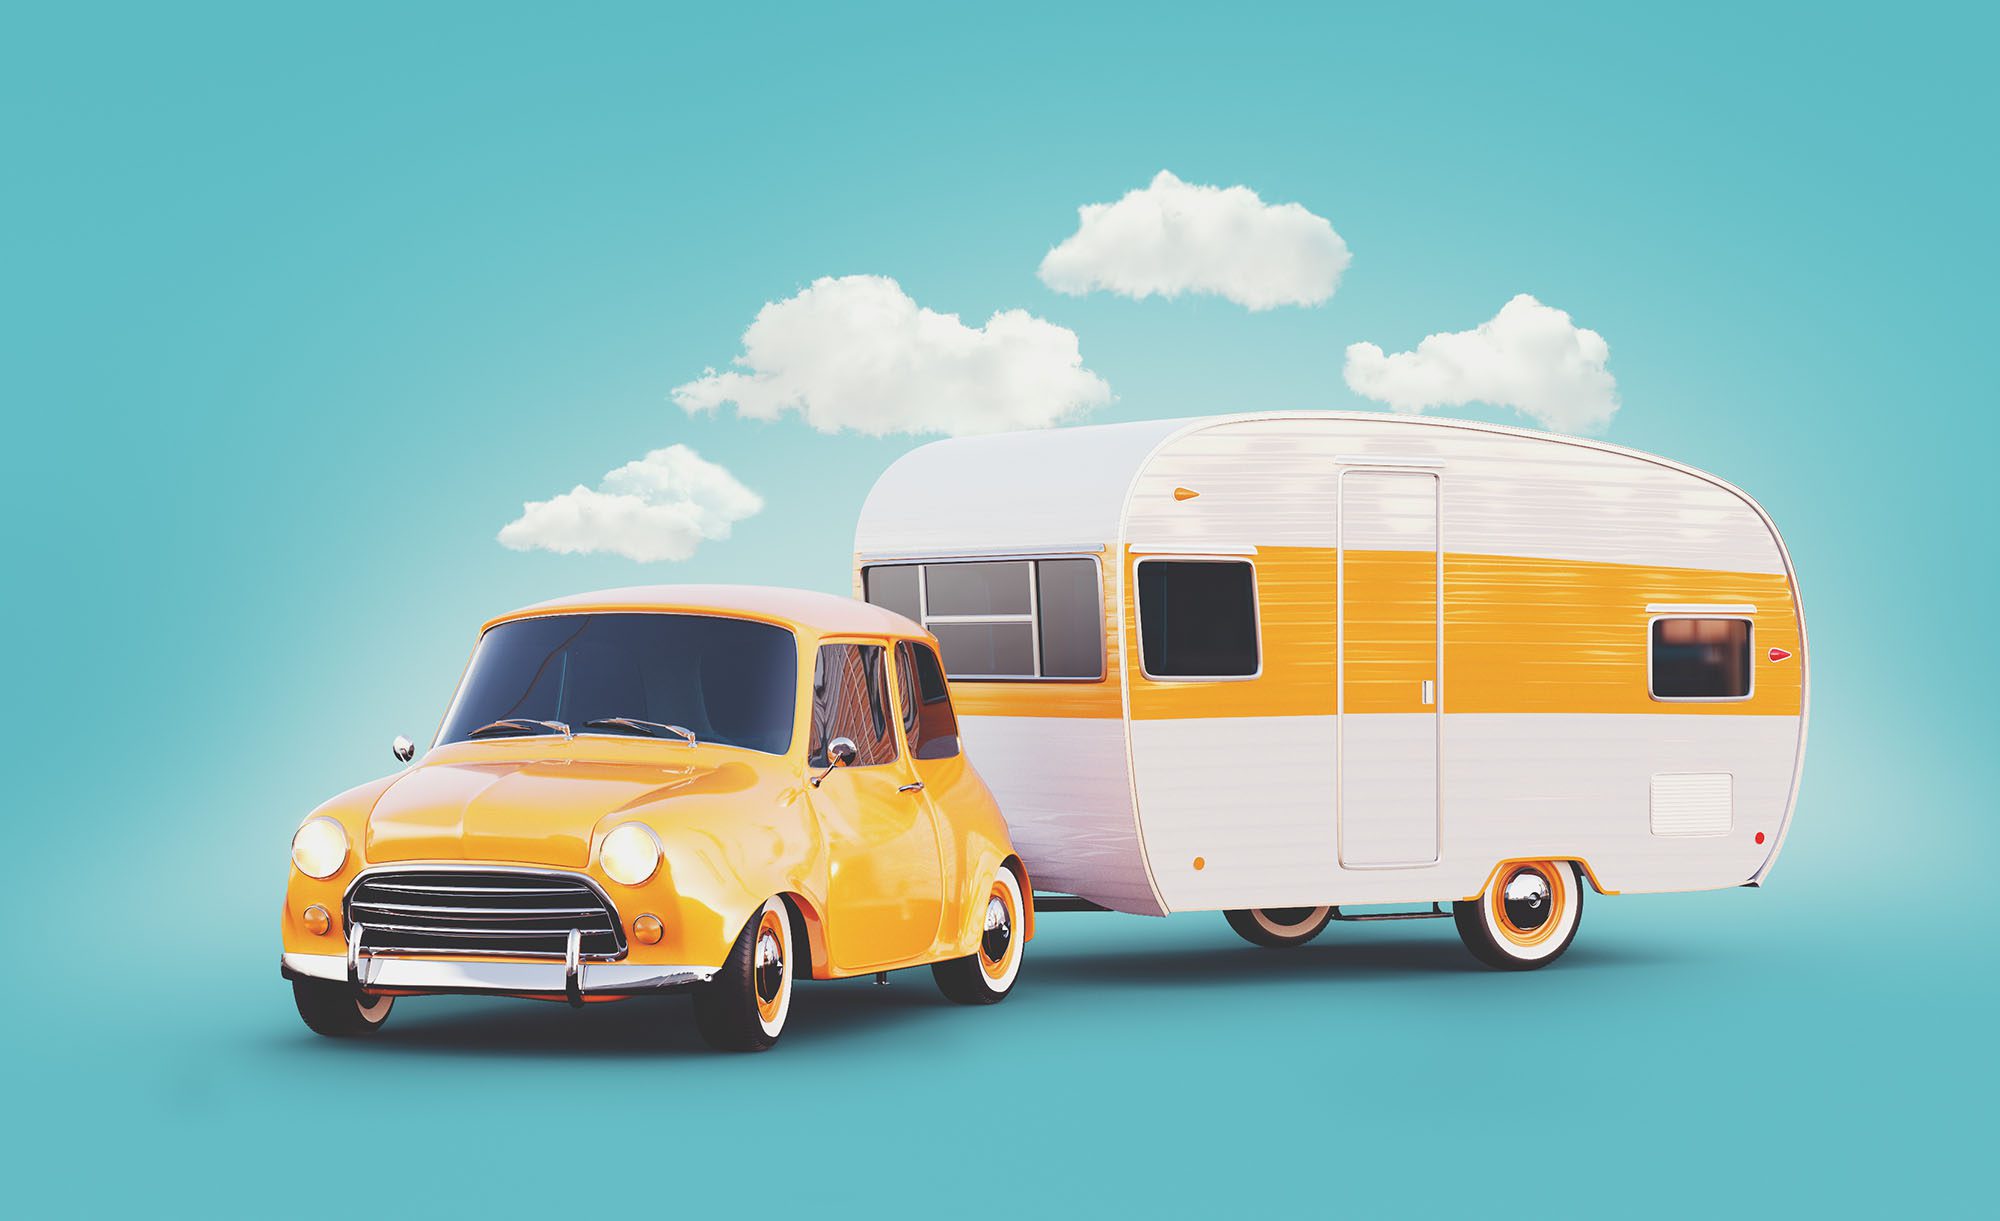 Retro car with white trailer. Unusual 3d illustration of a caravan. Camping and traveling concept